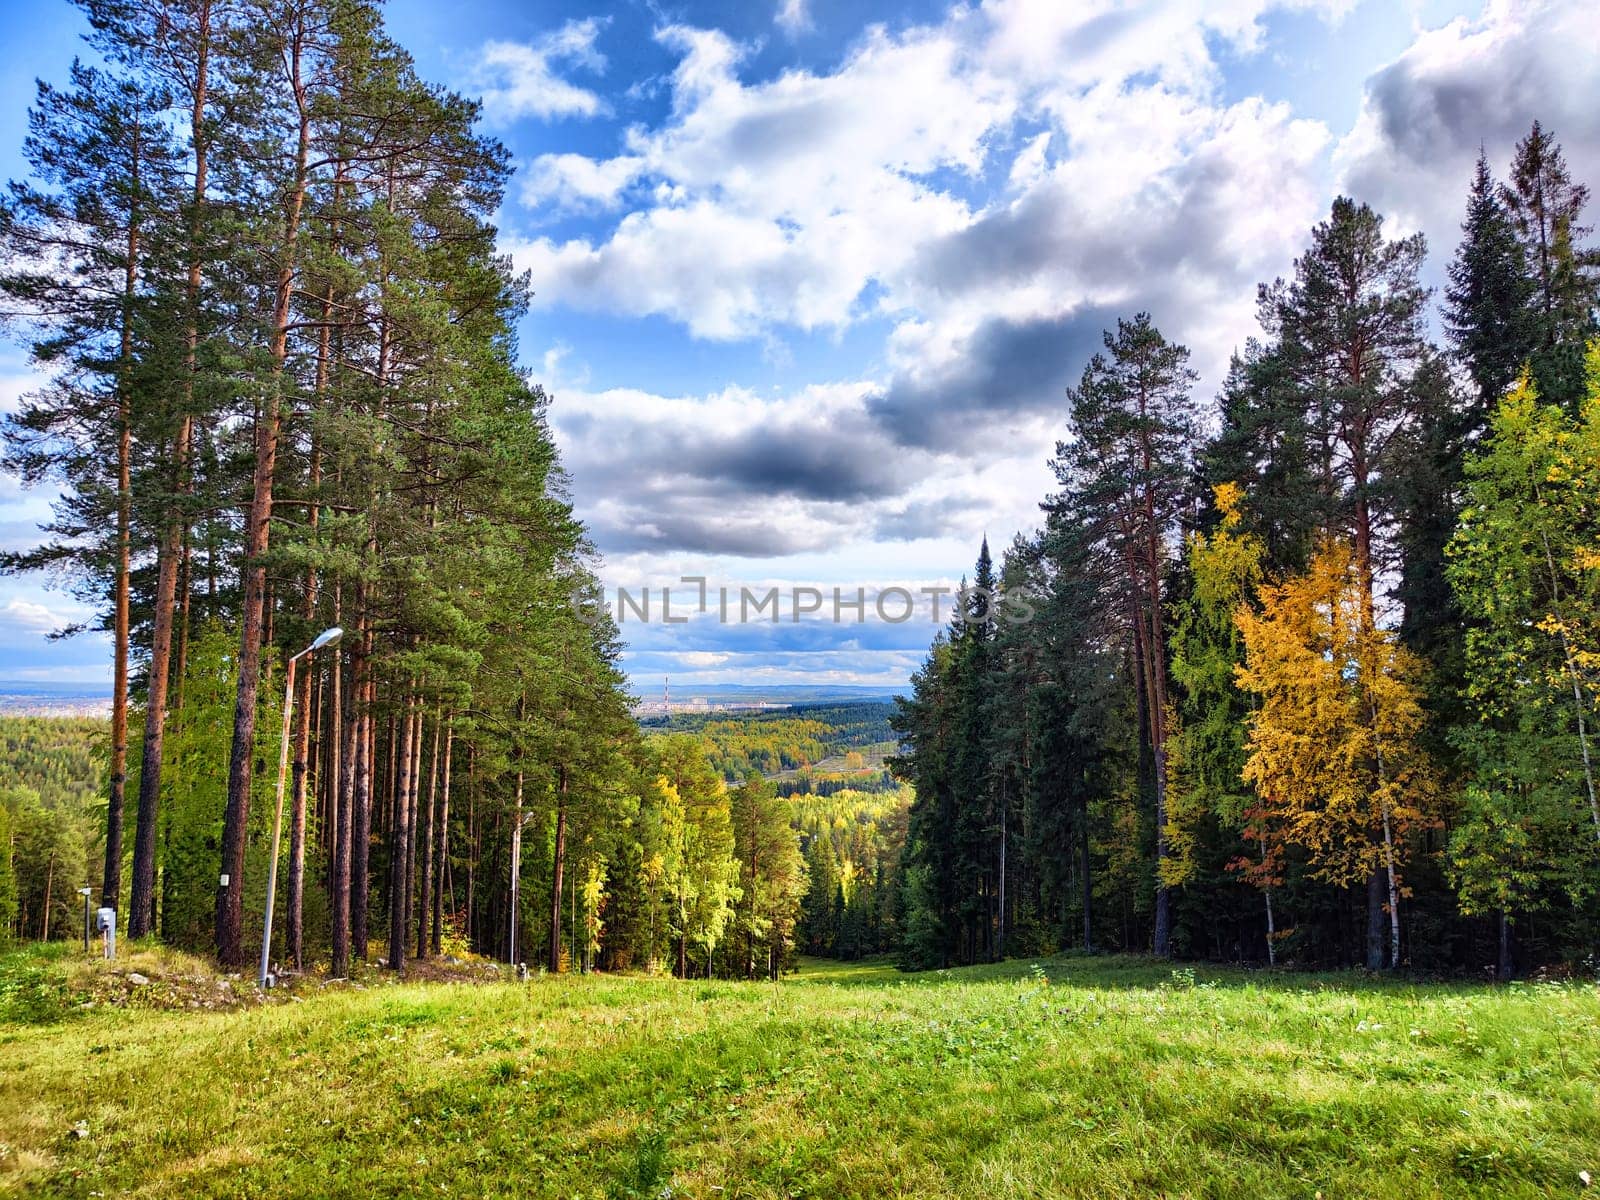 A forest on a hill or hill. Ski slope in summer or autumn. Green Summer Slopes: Tranquil Scene of a Former Ski Hill Amidst a Forest by keleny